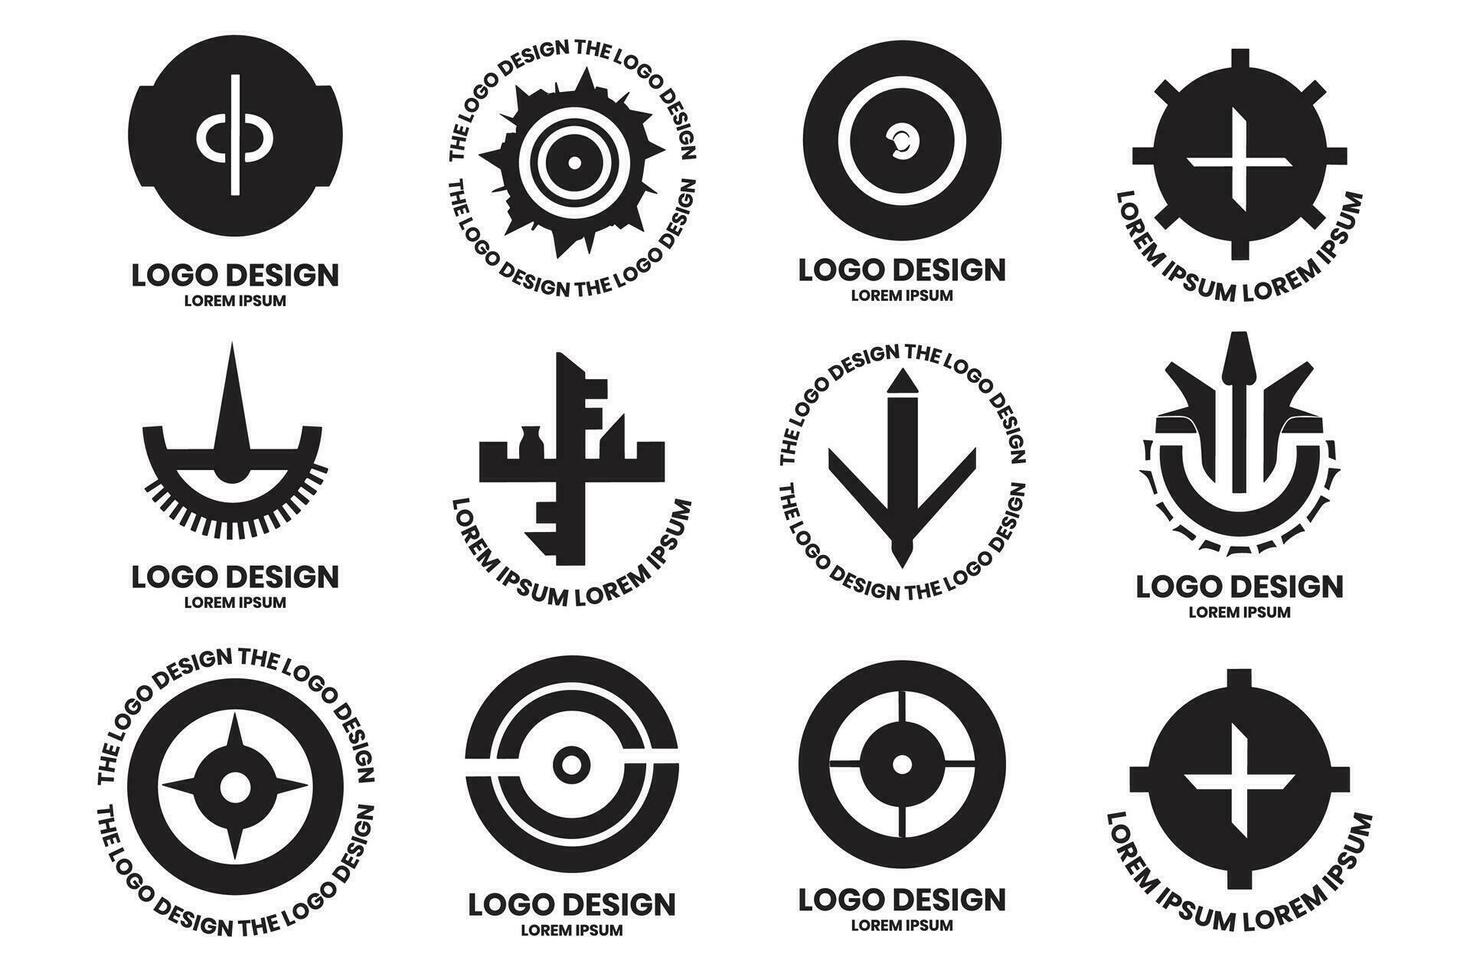 Modern gear and circle logo in minimalist style vector